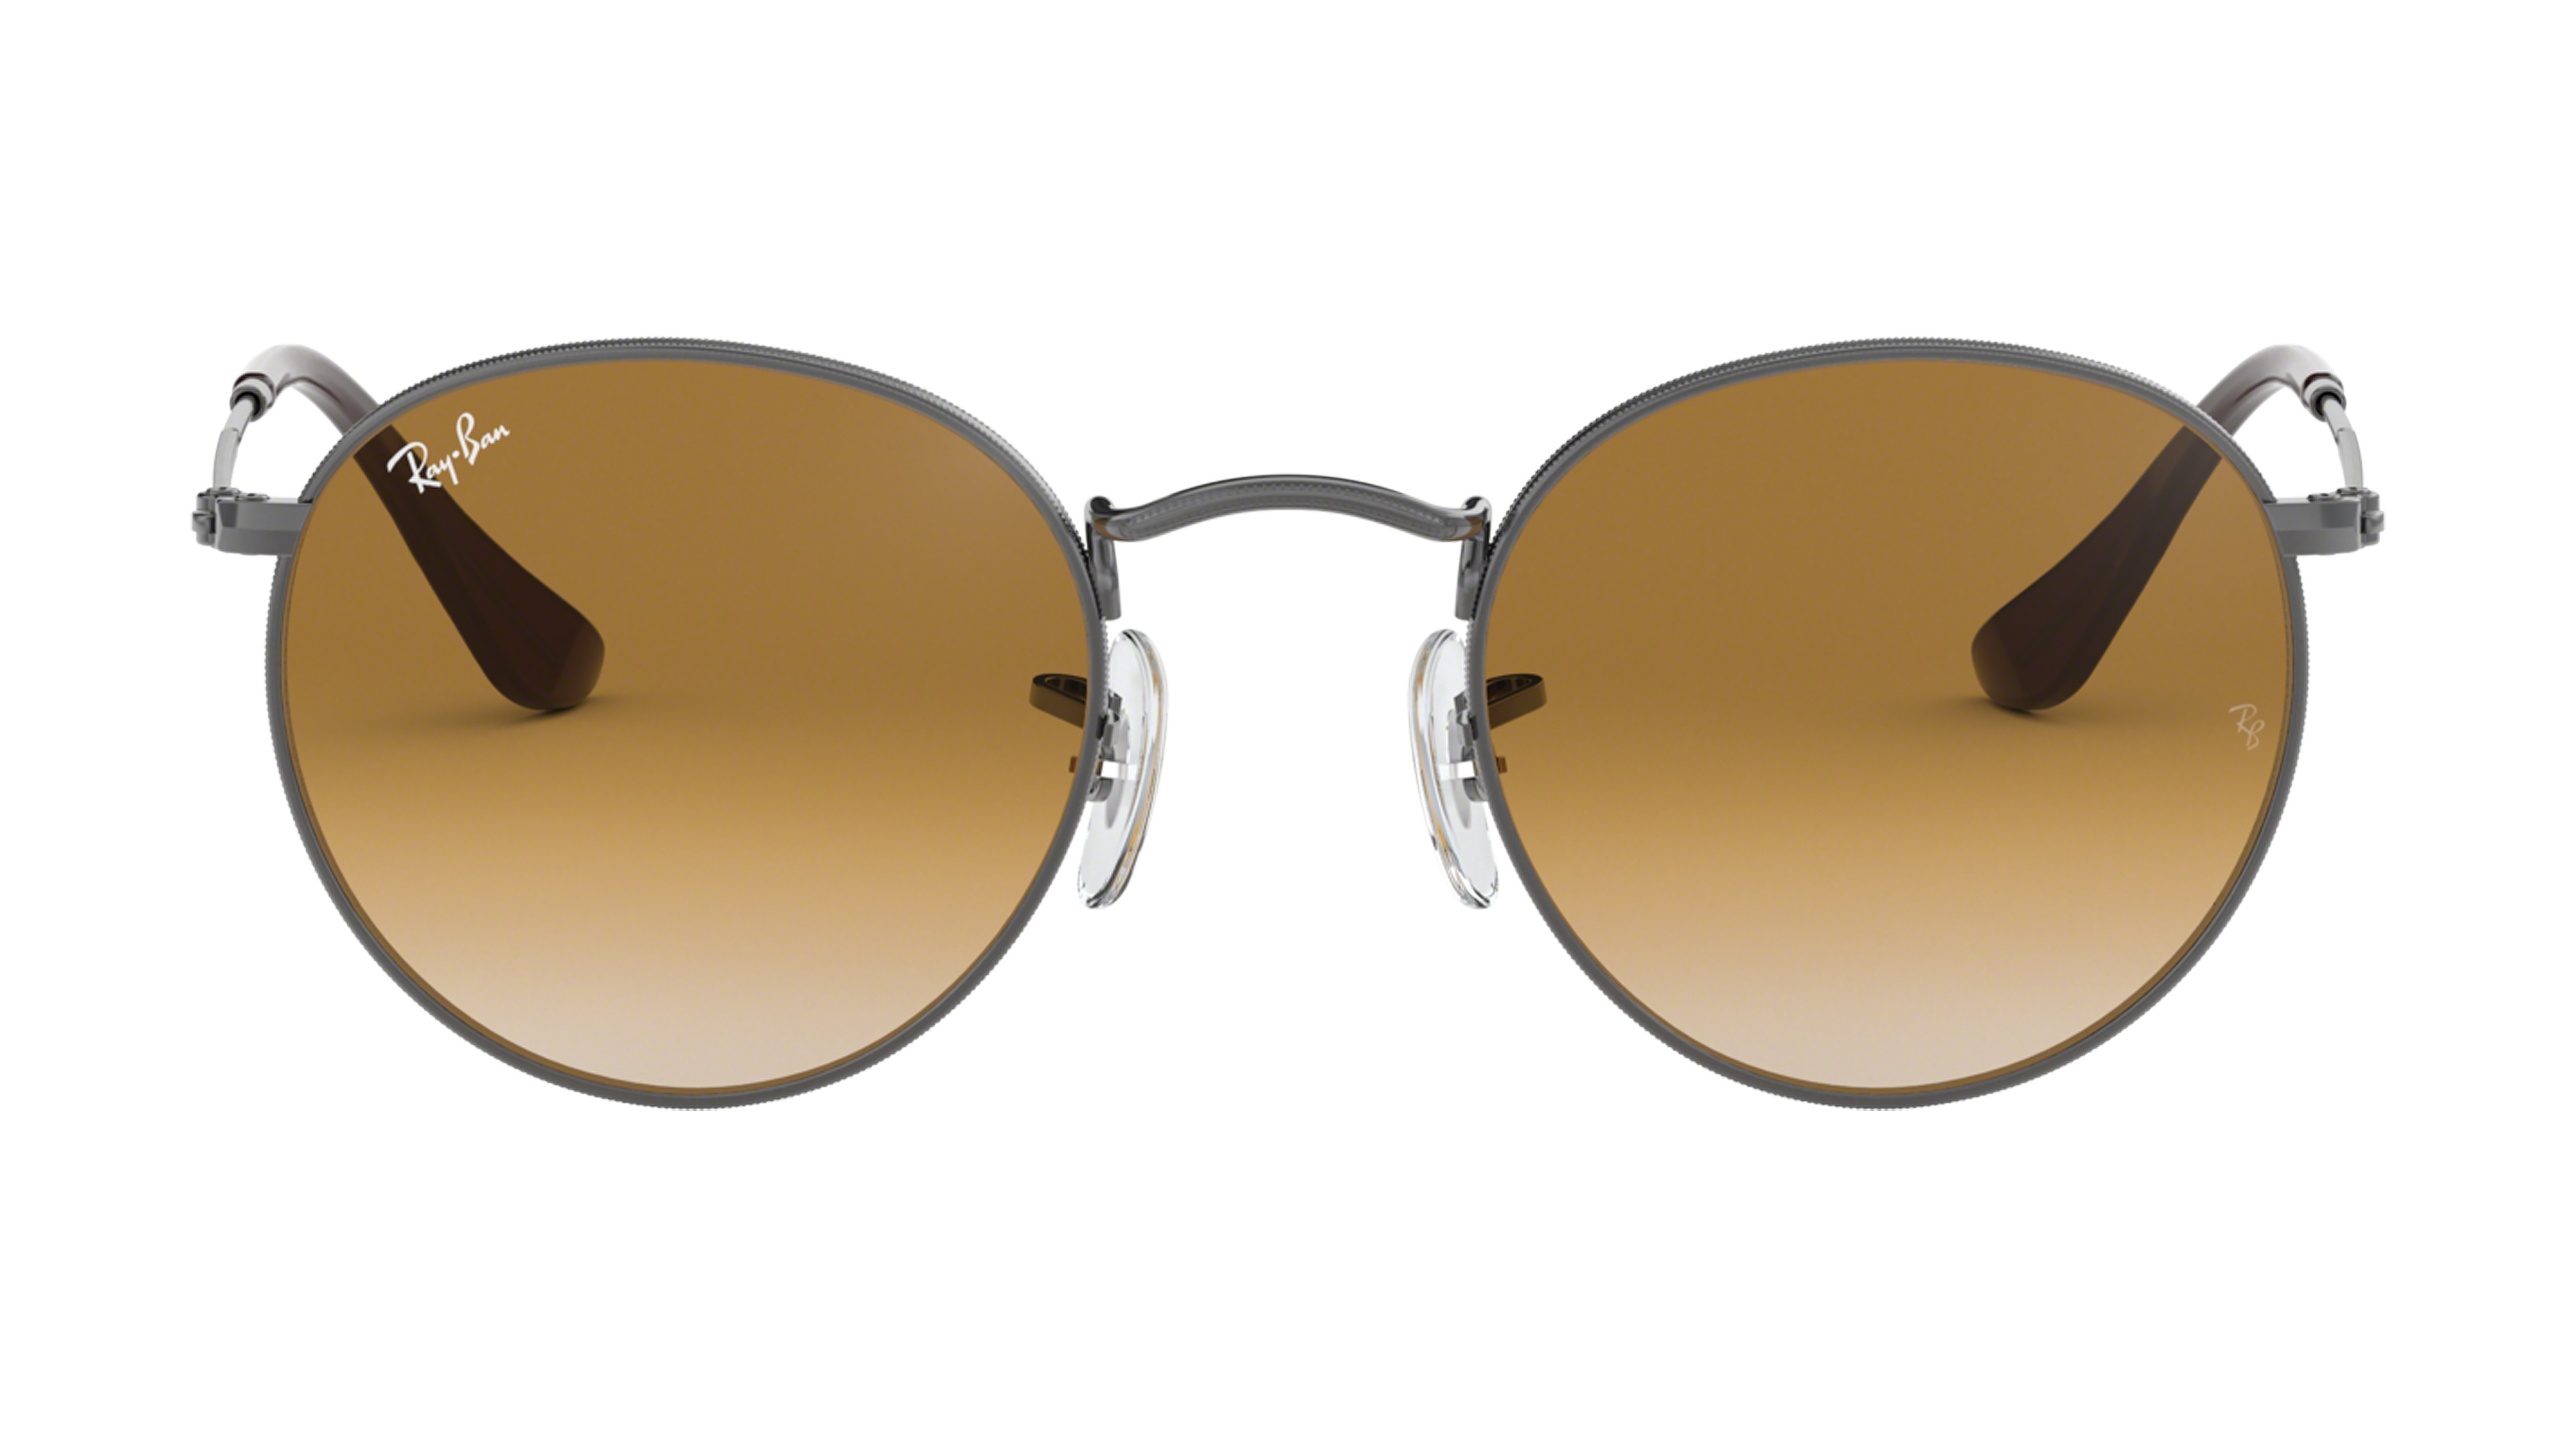 [products.image.front] Ray-Ban ROUND METAL 0RB3447N 004/51 Sonnenbrille